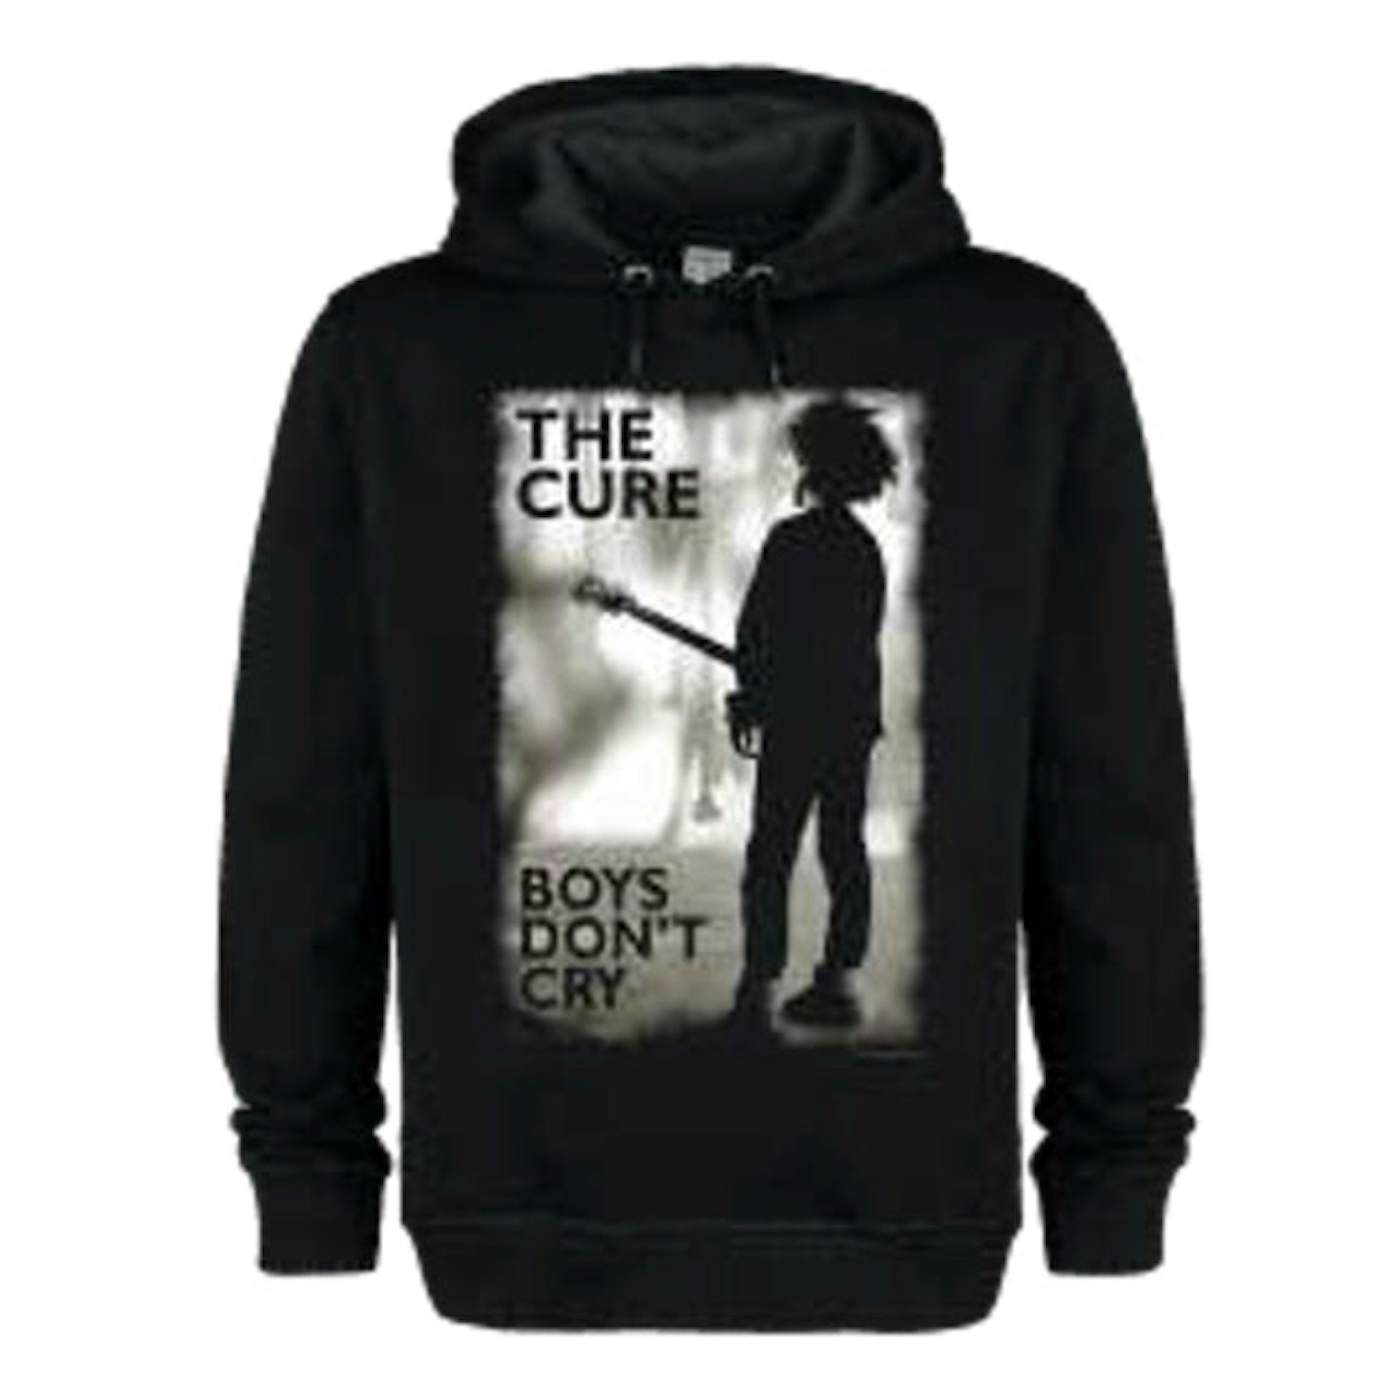 The Cure Vintage Hooded Sweatshirt - Amplified Boys Don't Cry